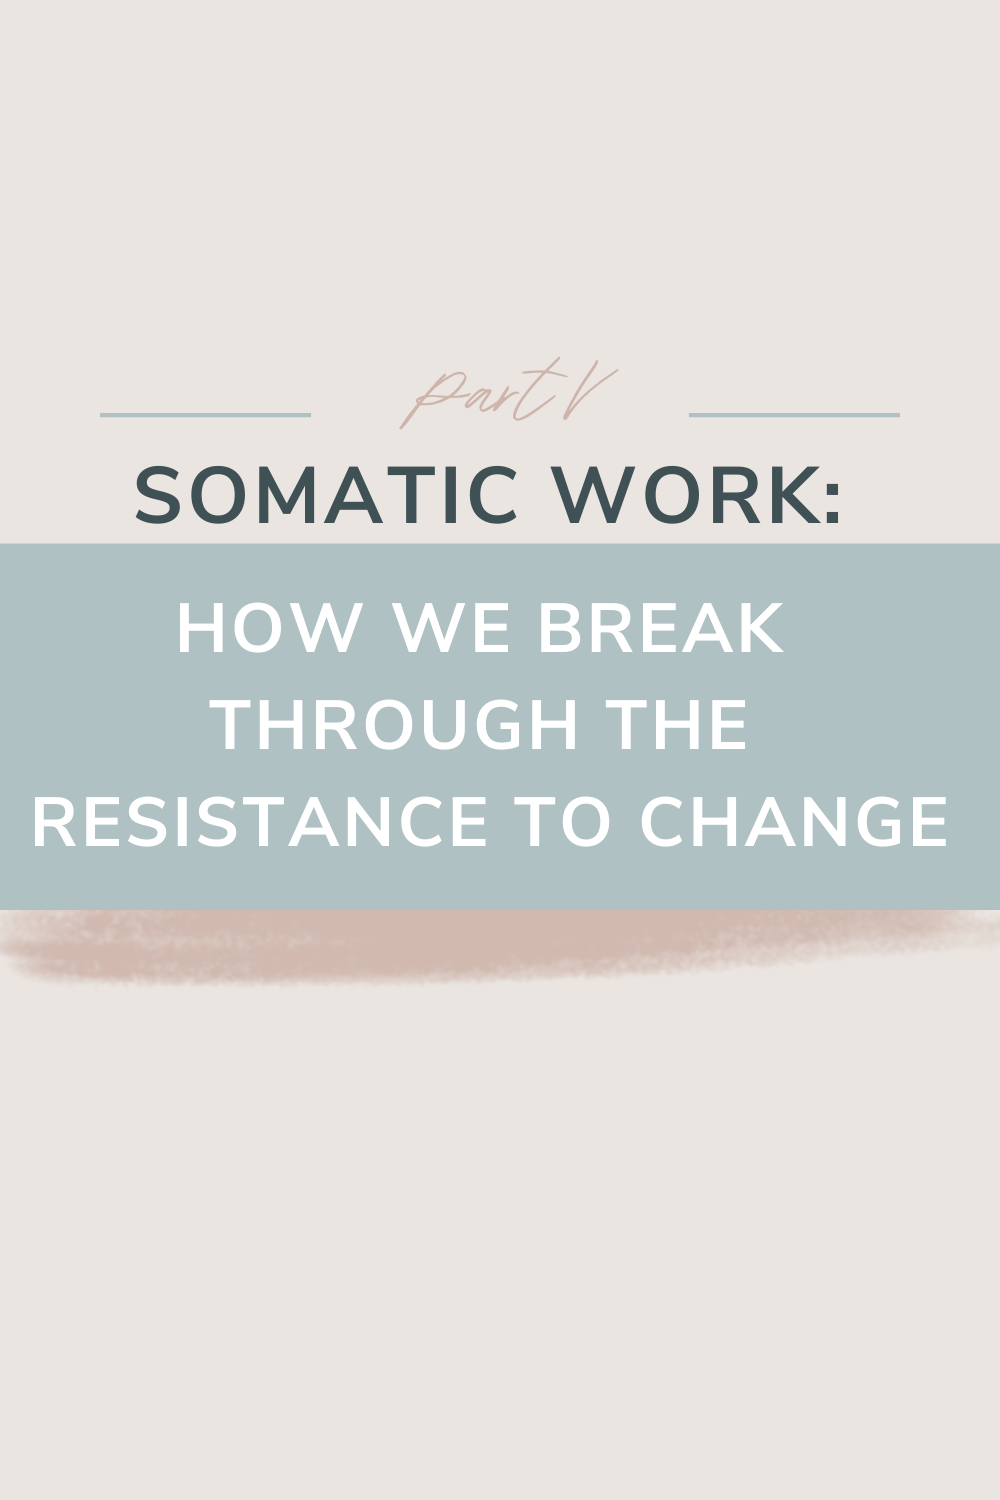 Somatic Work: How We Break Through the Resistance to Change | This part rounds out a five part series on using the Enneagram for growth in relationships. Learn more about how resistance to change shows up in each of us and how we can work through that using our very own bodies. Cheers!